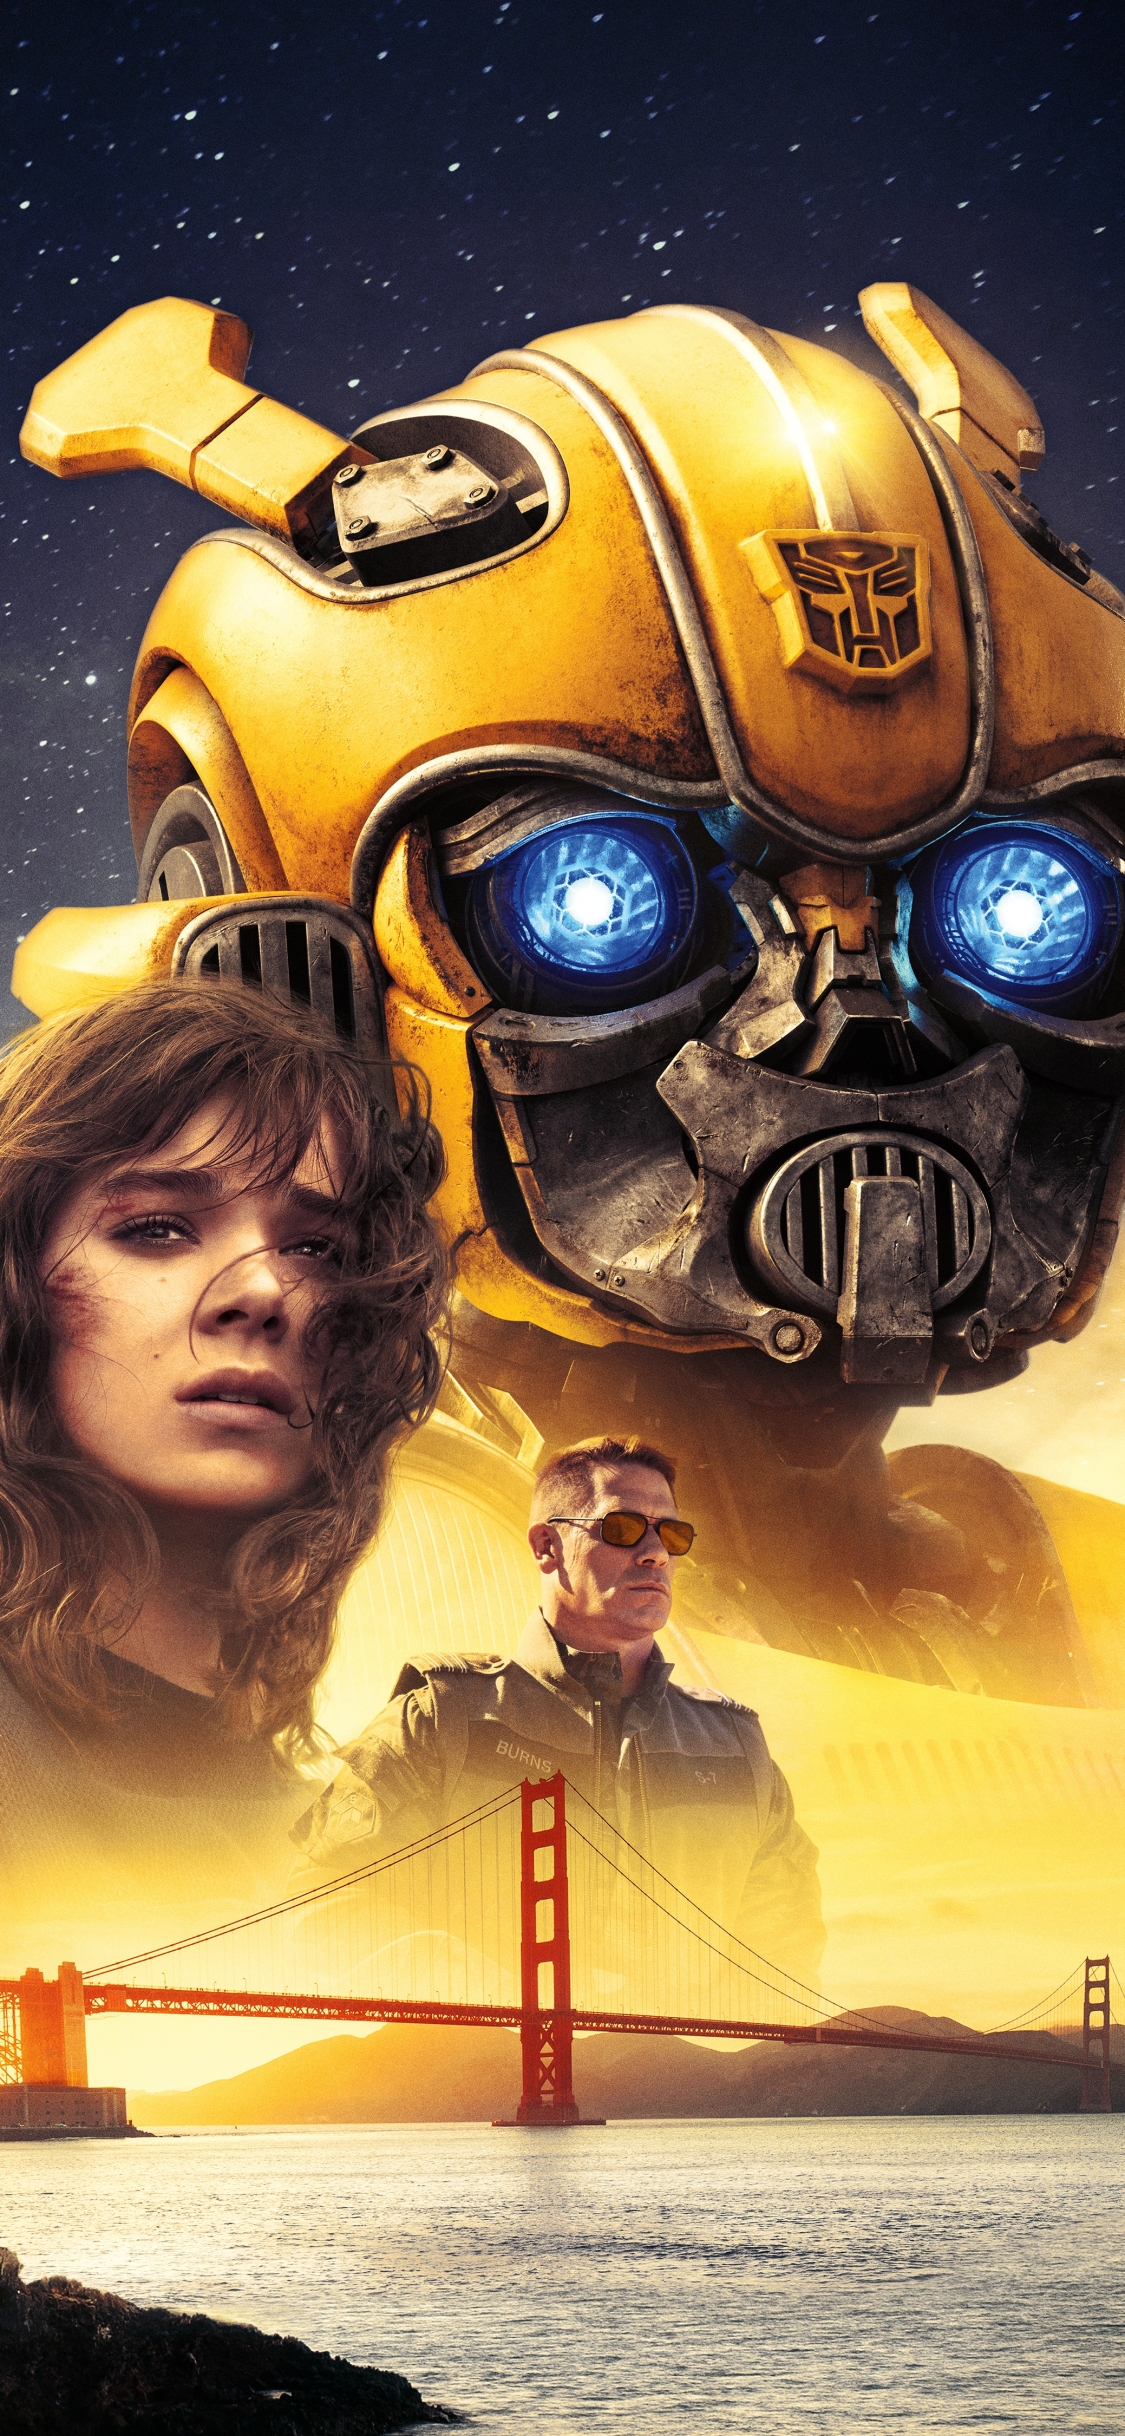 Mobile wallpaper: Bumblebee, Movie, Hailee Steinfeld, Bumblebee  (Transformers), 1322208 download the picture for free.